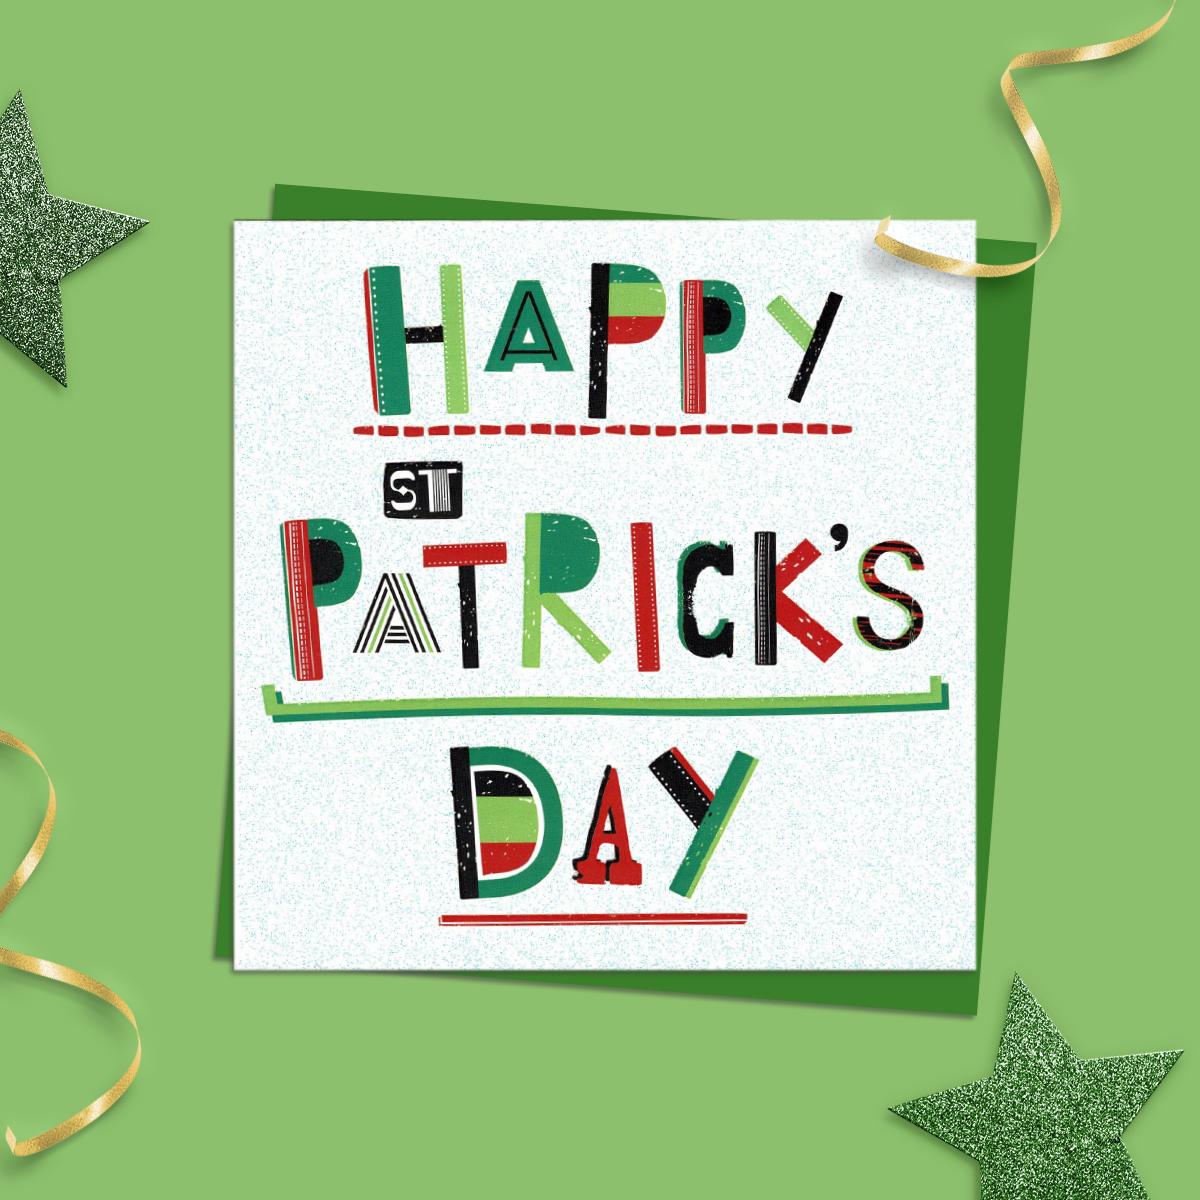 ' Happy St. Patrick's Day' Card With Colourful Text and Added Sparkle. With Green Envelope